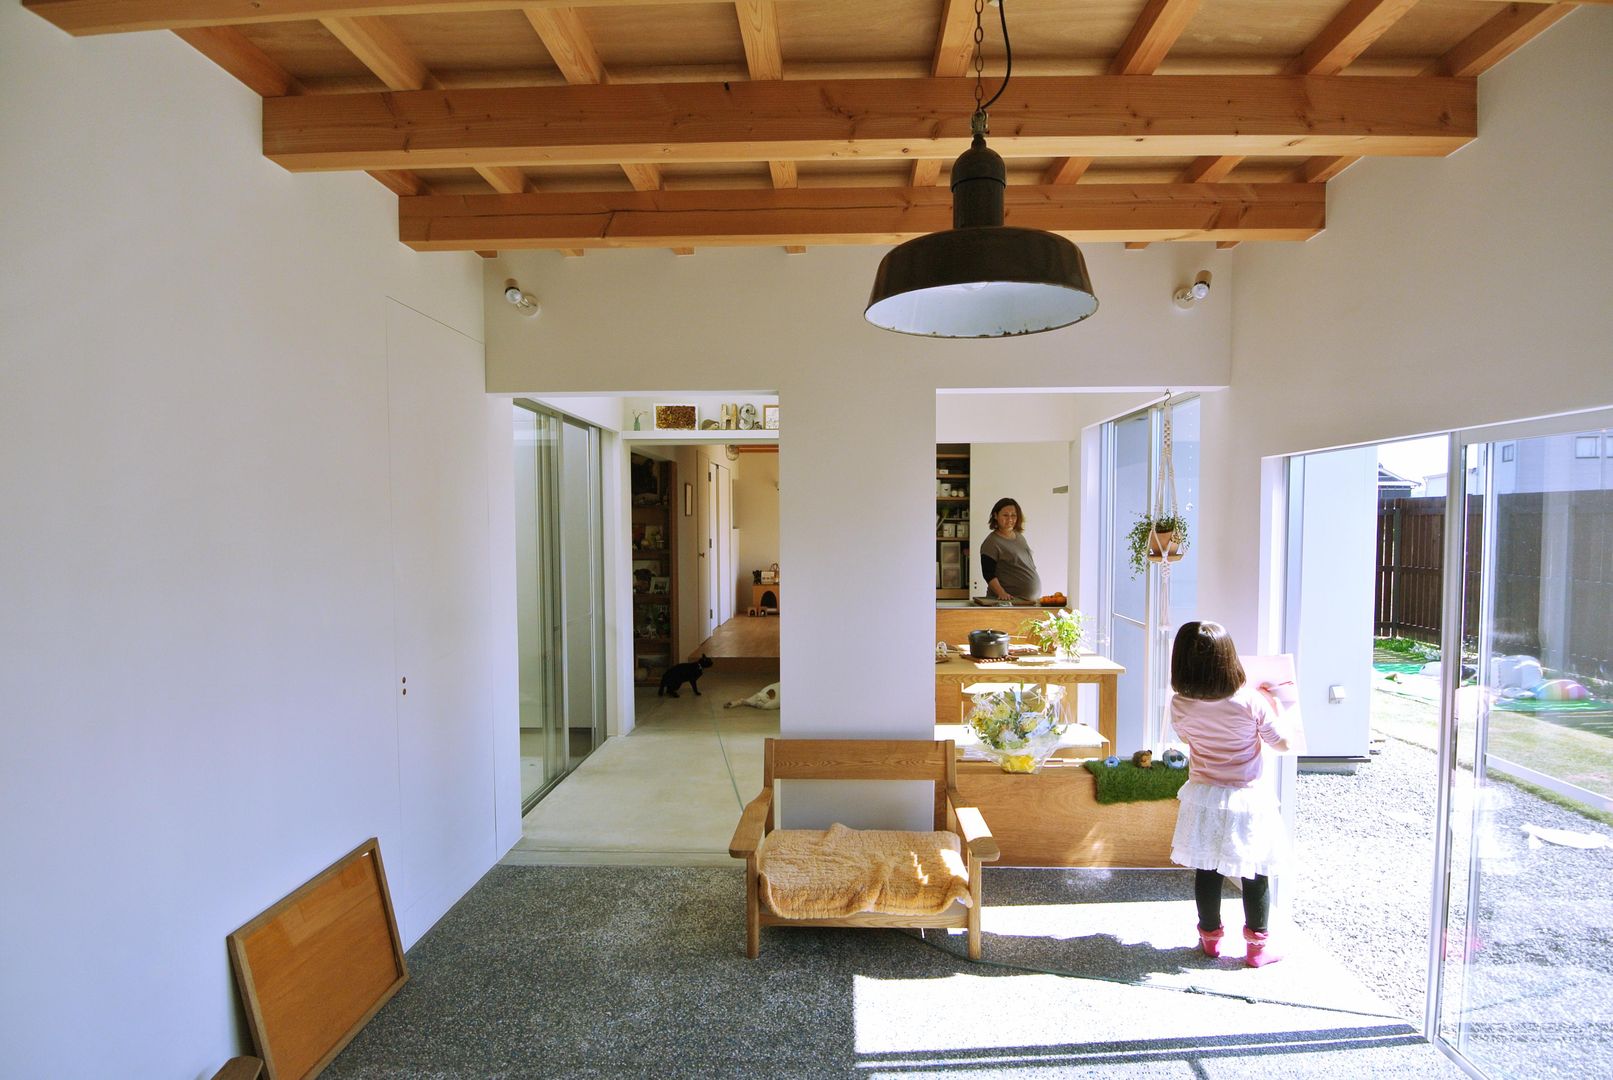 ​House for DONKORO, シキナミカズヤ建築研究所 シキナミカズヤ建築研究所 Moderne woonkamers Hout Hout